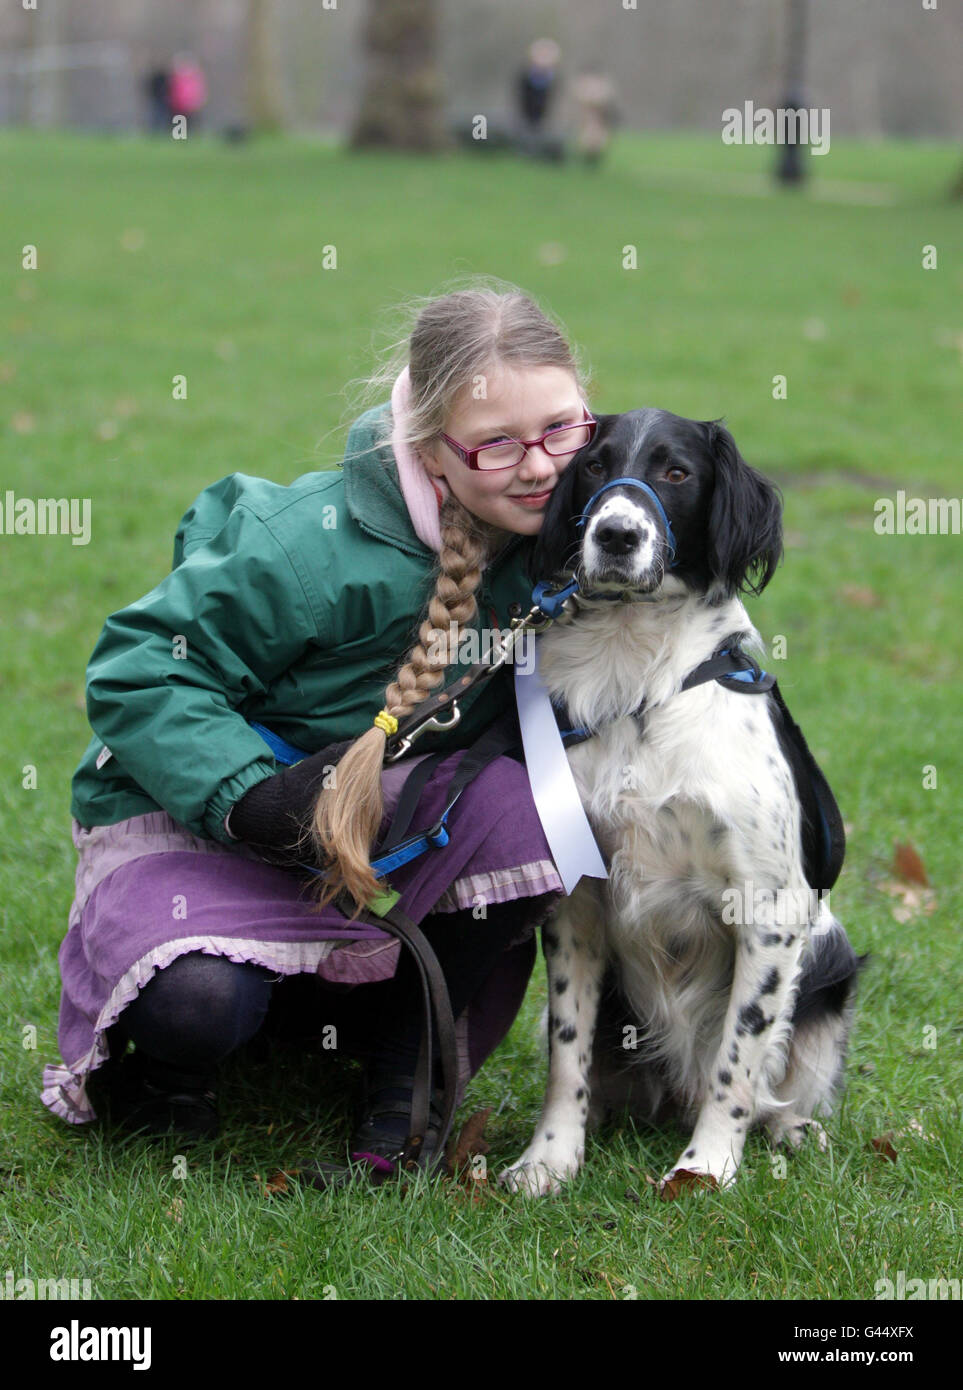 Grace Brown-Griffin, 10, with Merlin, a cross breed who works as a Support Dog for Grace who is autistic and has ADHD, during a photocall for the five finalists who are competing for the Crufts Friends for Life award in Green Park, London. Stock Photo